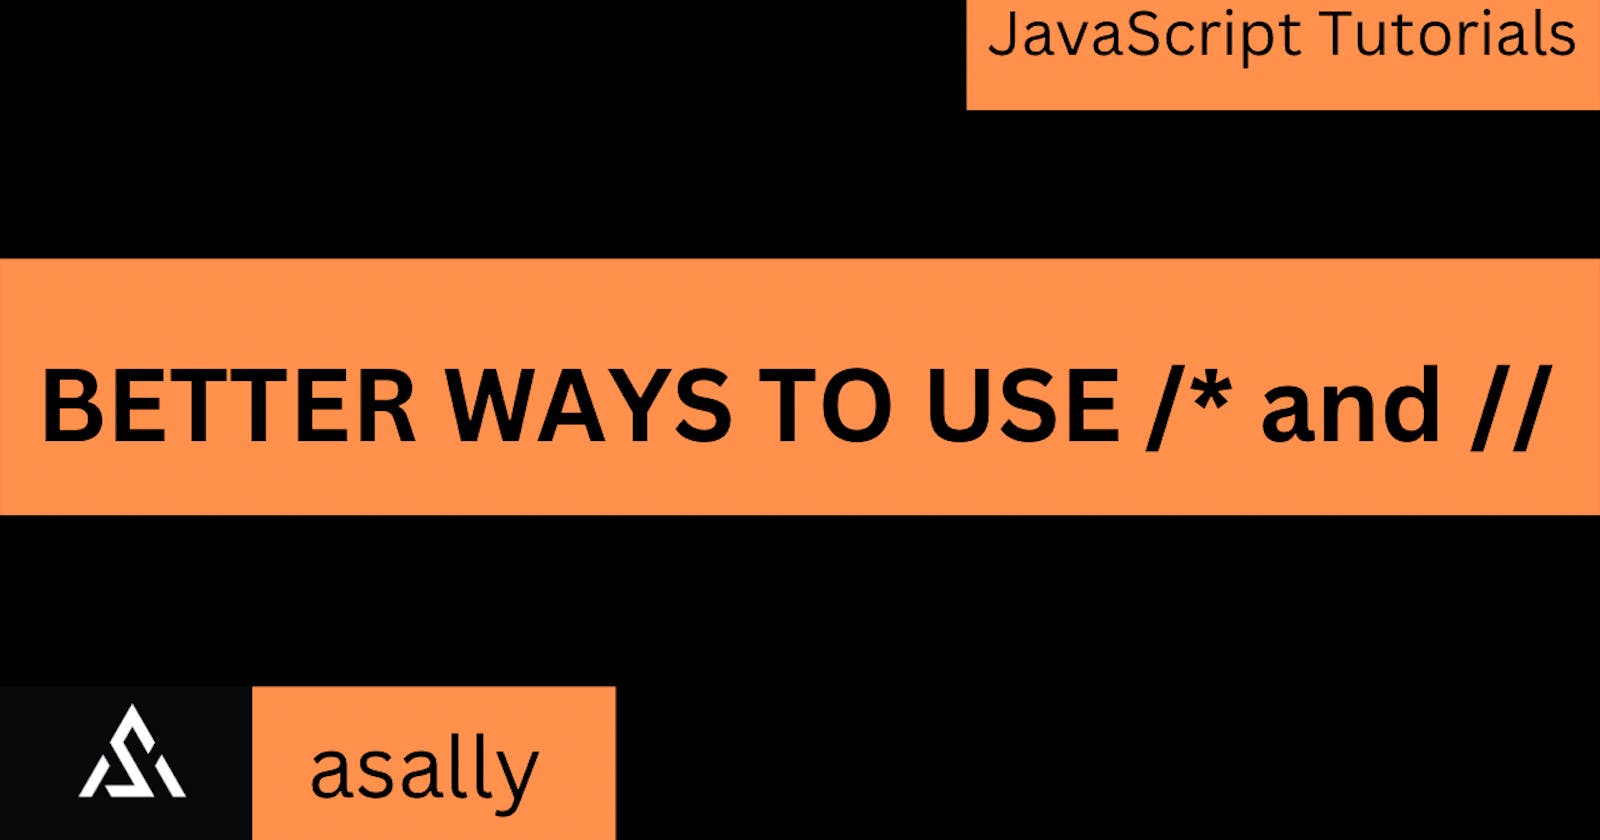 Comments in JavaScript